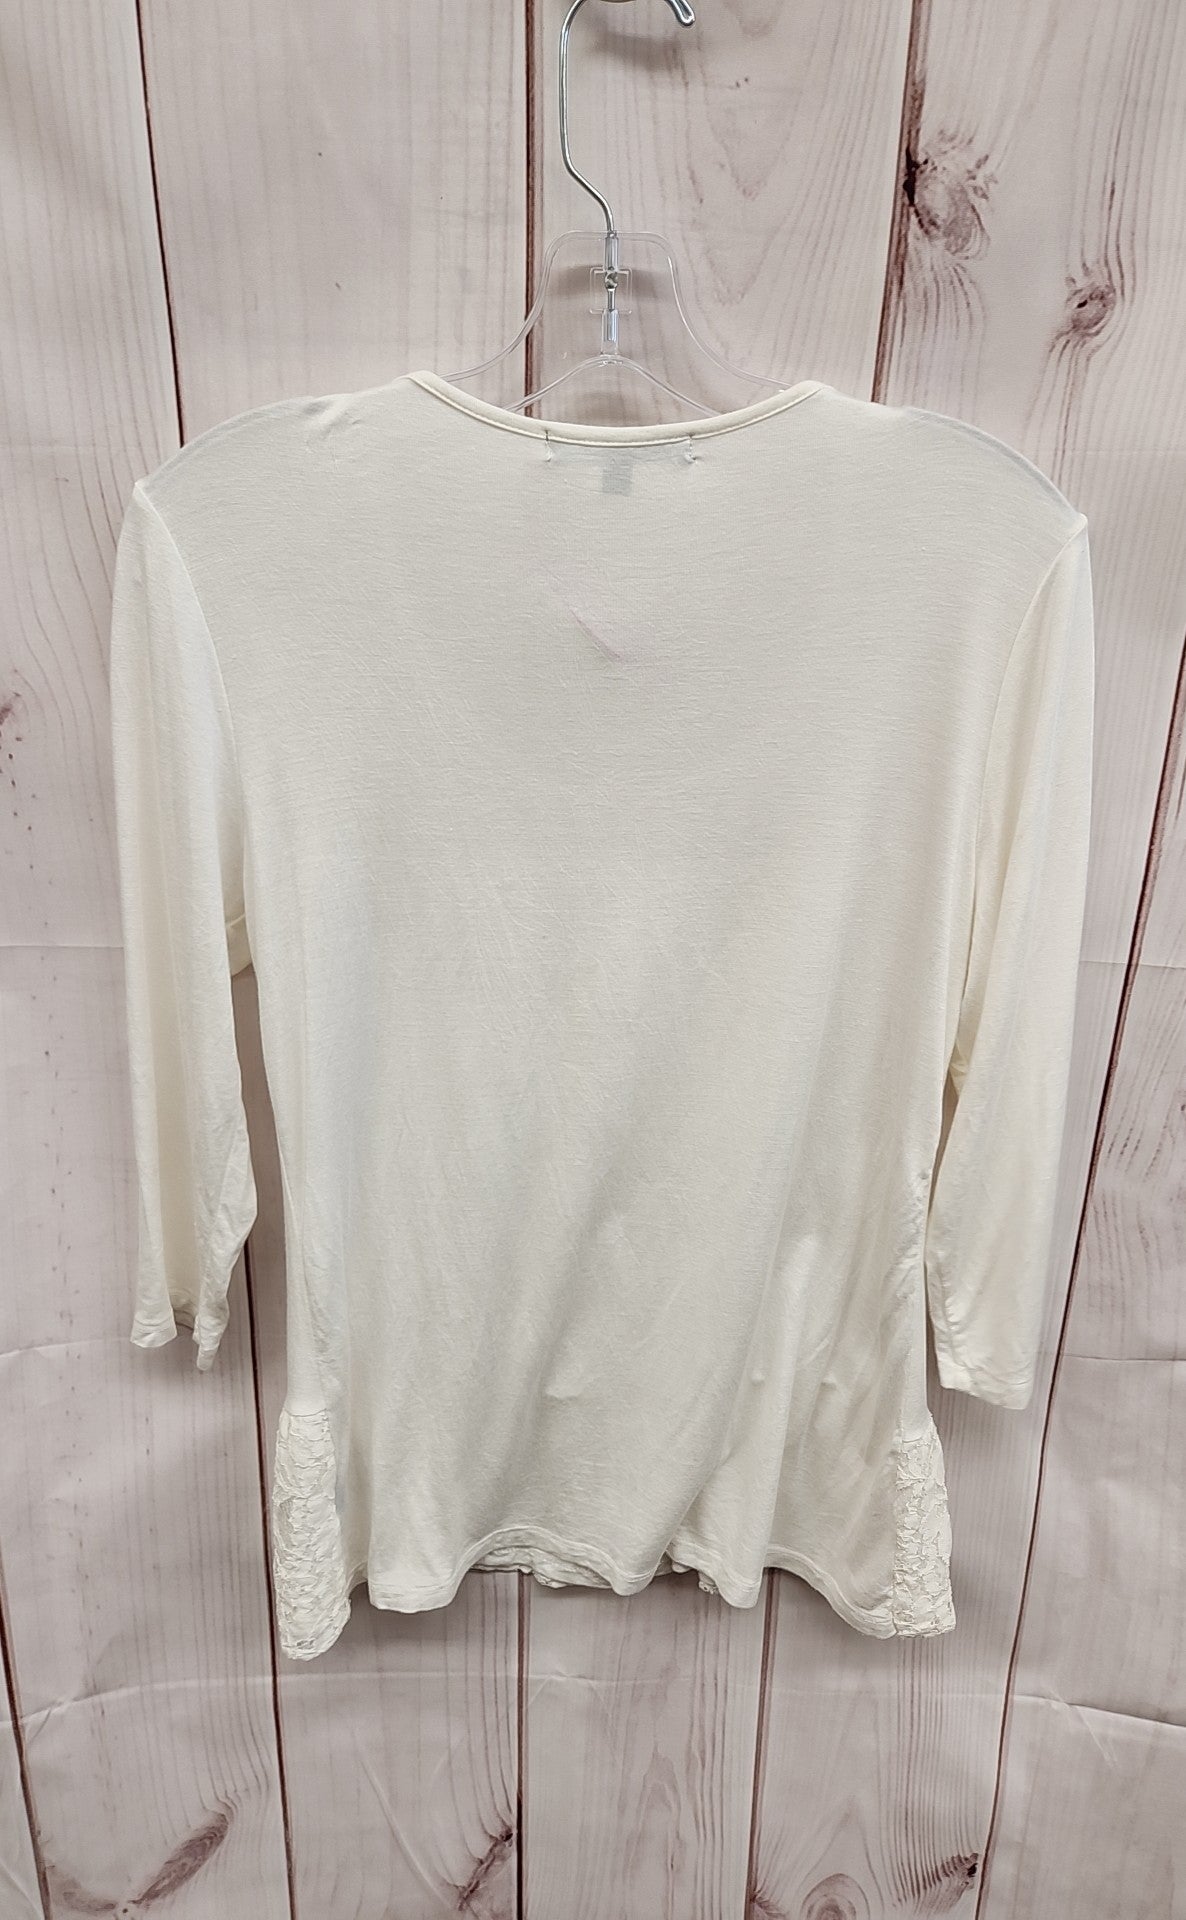 89th & Madison Women's Size S White 3/4 Sleeve Top